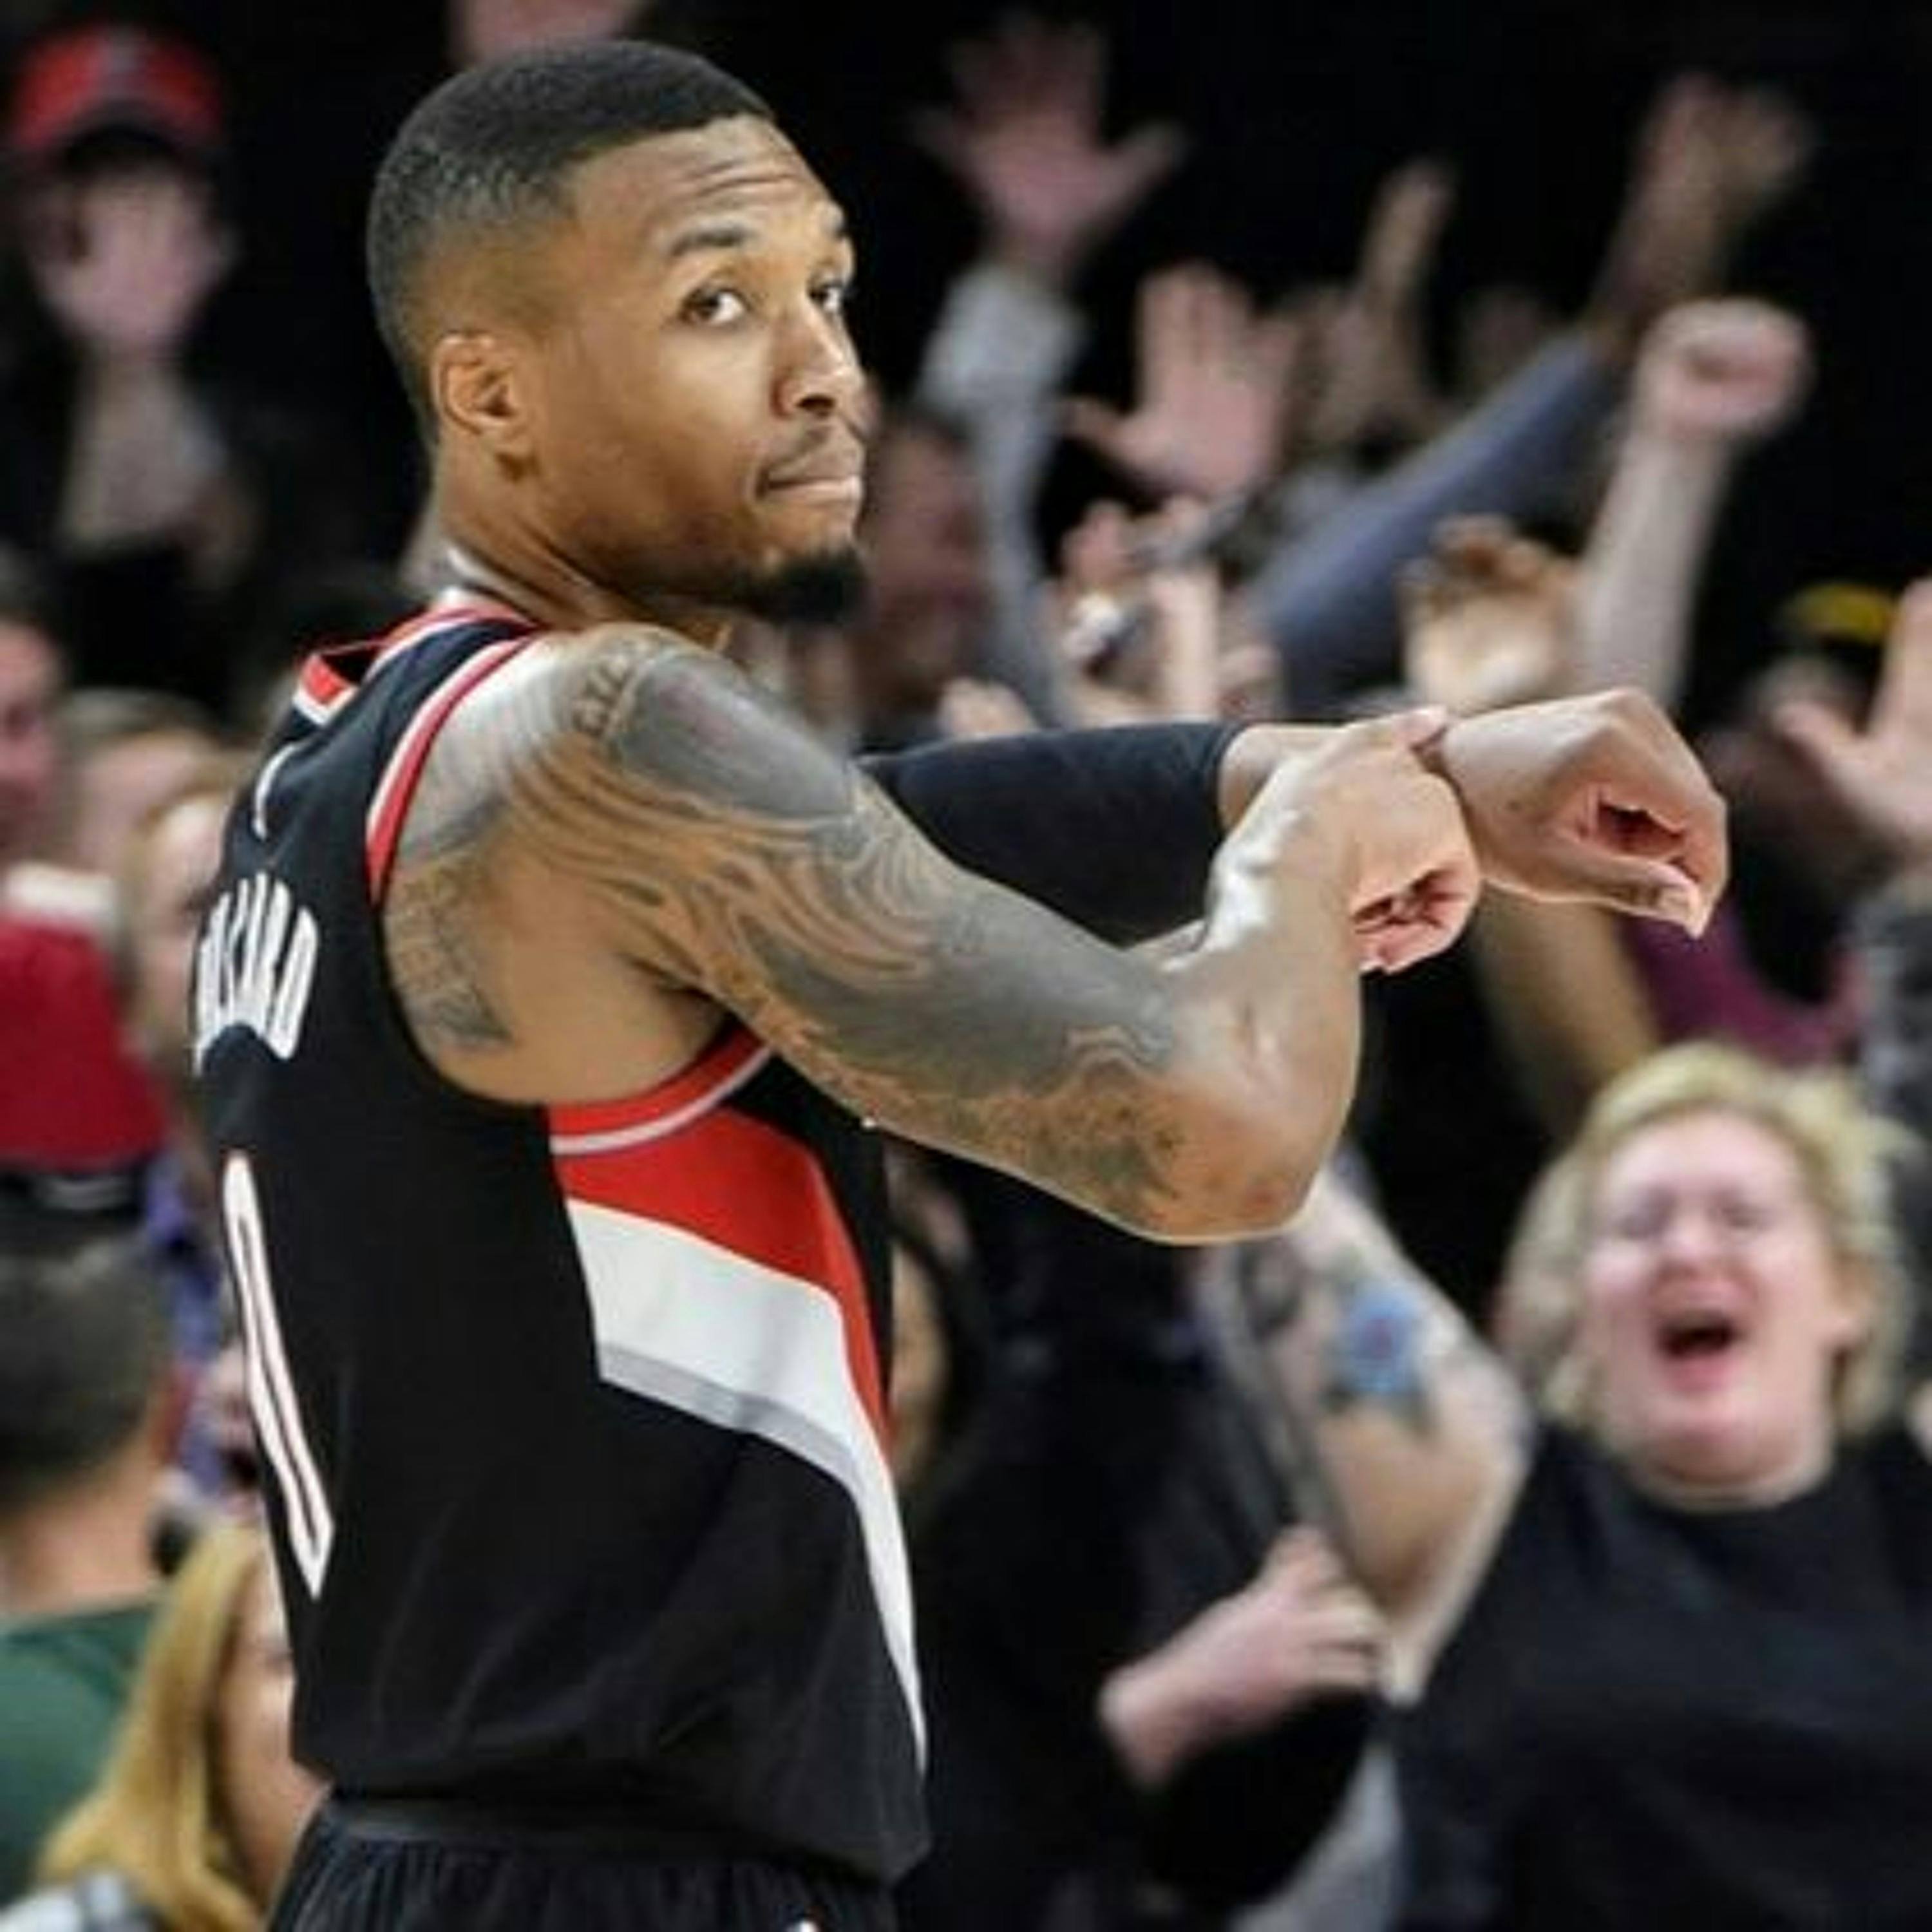 3-on-3 Blazers: The Blazers are championship contenders [it’s true]